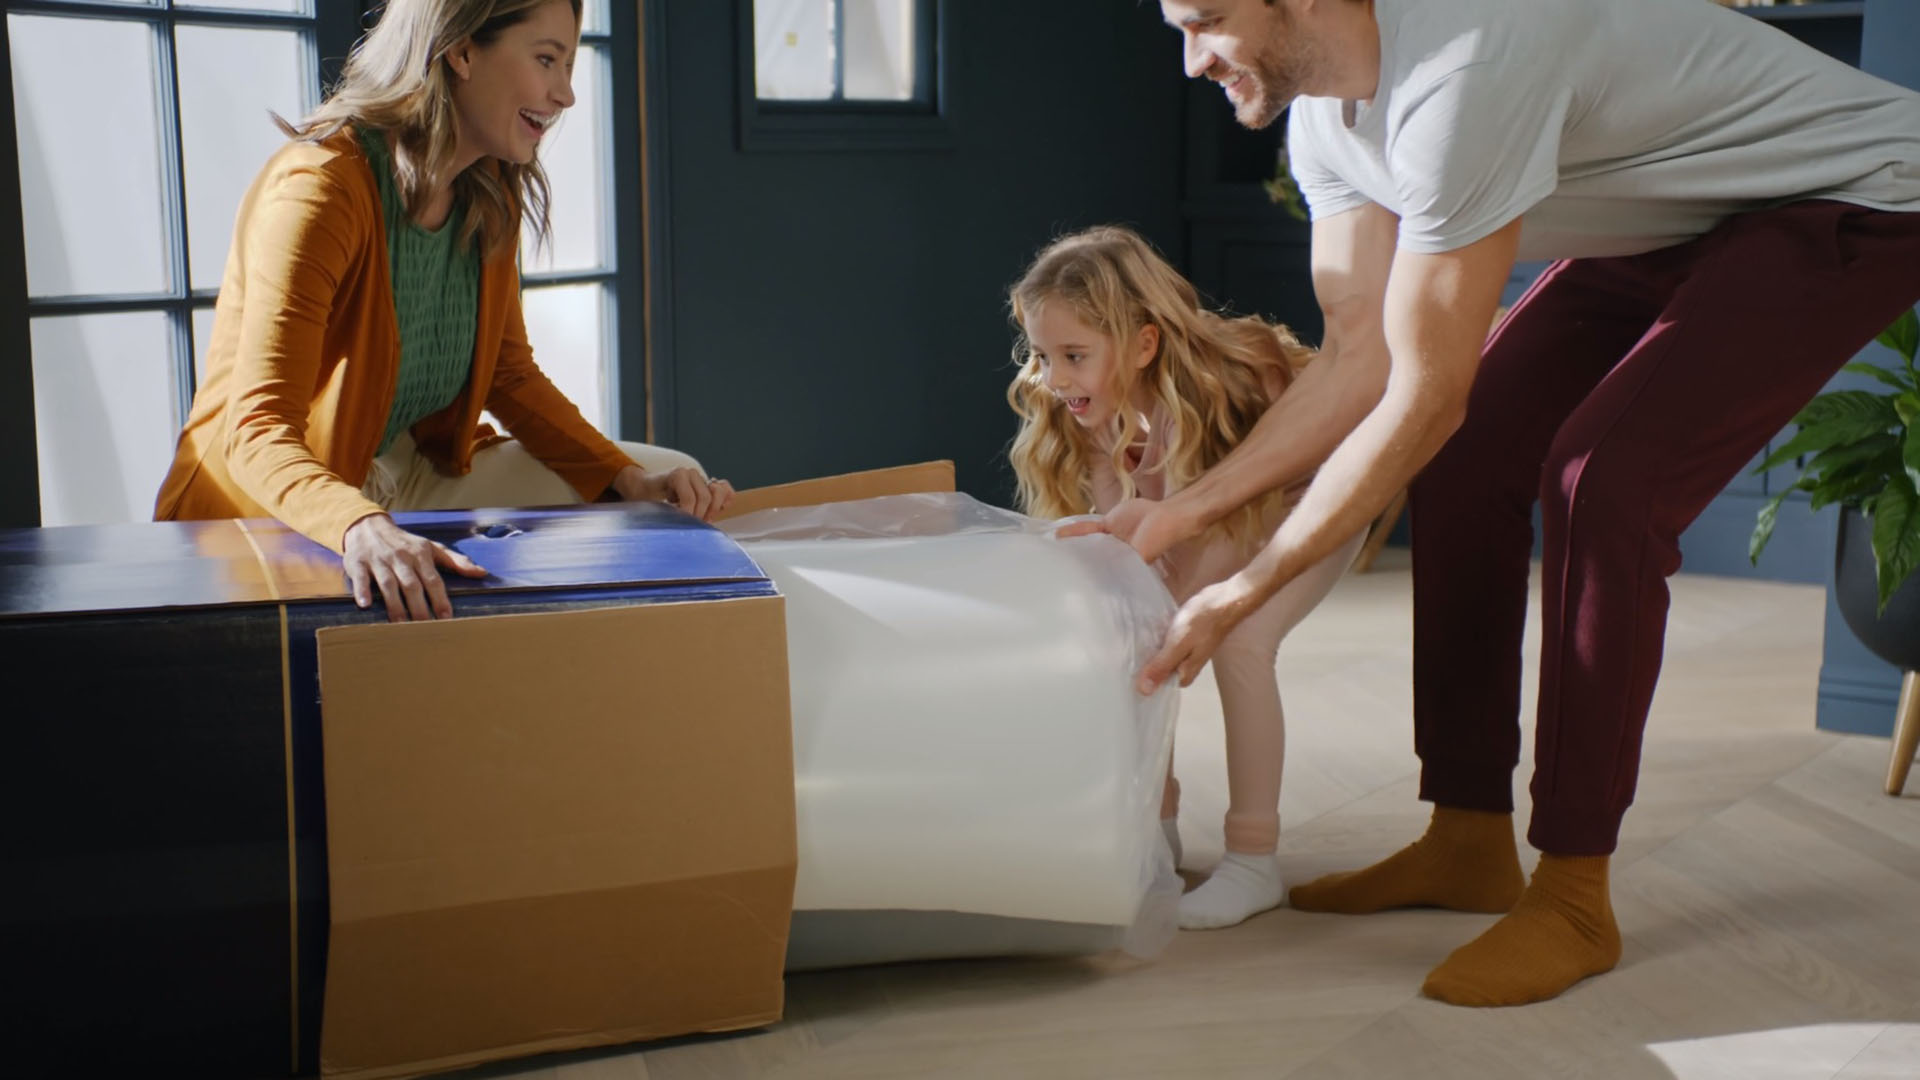 A family unboxing a Dreamcloud mattress in Bolingbrook, Illinois